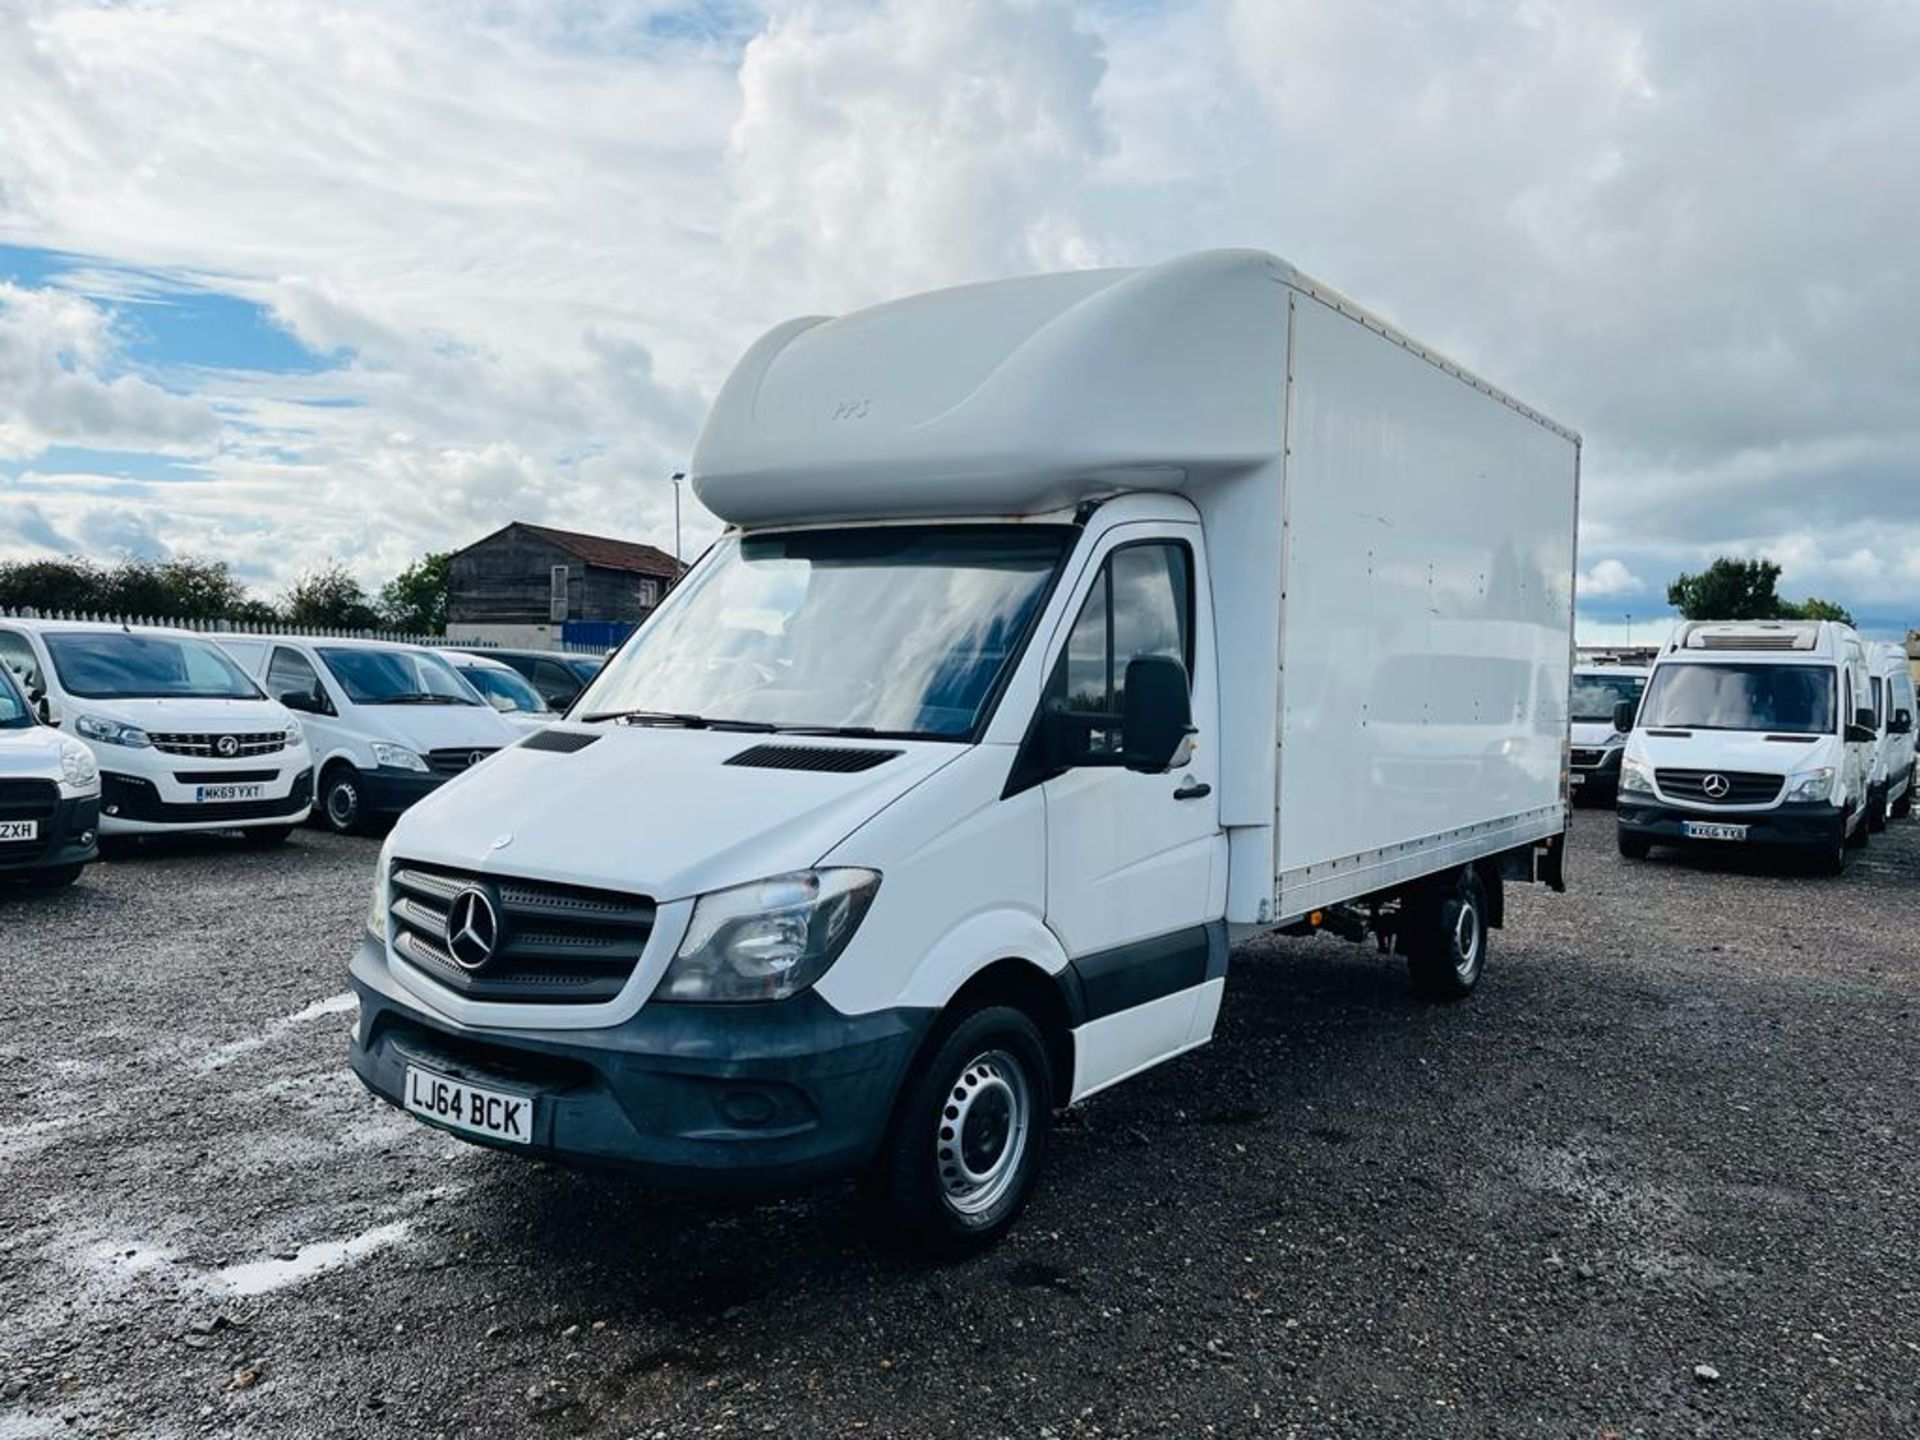 ** ON SALE ** Mercedes Benz Sprinter 2.1 313 CDI L3 Luton Tail Lift 2014 '64 Reg' Bluetooth Pack - Image 3 of 25